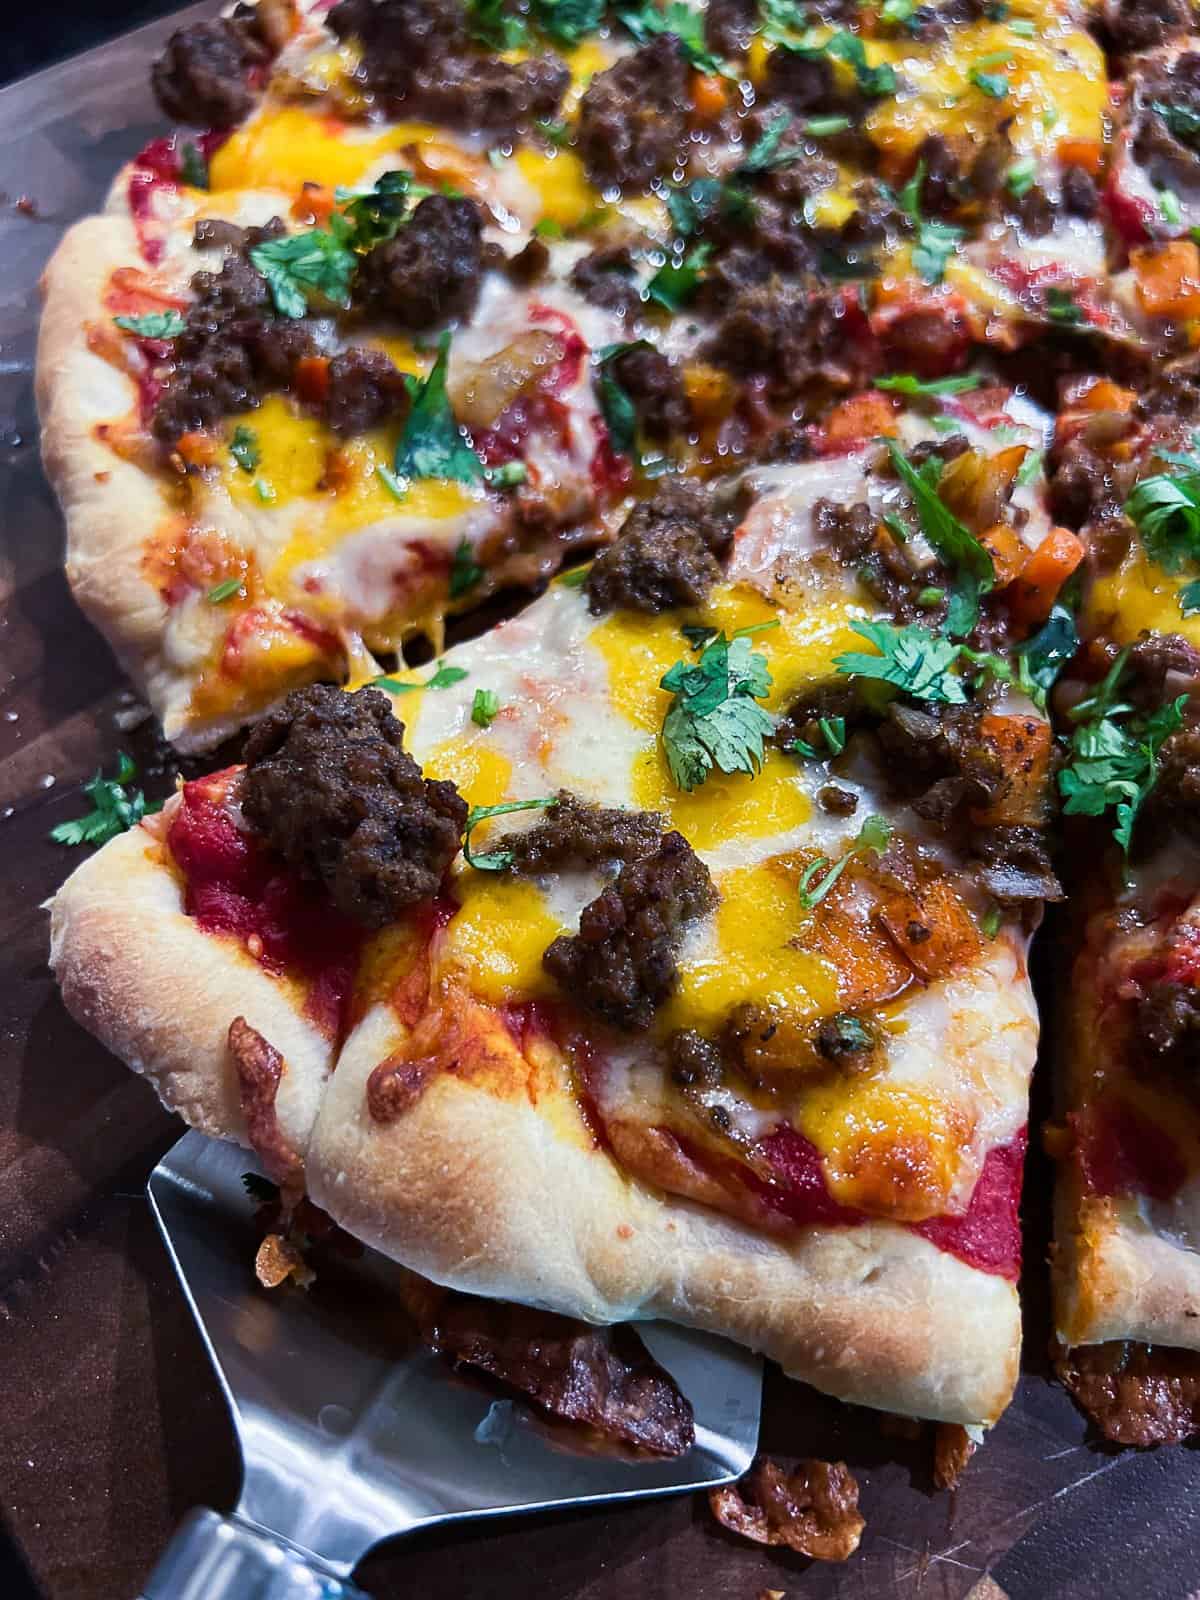 Ground beef recipe for pizza dinner